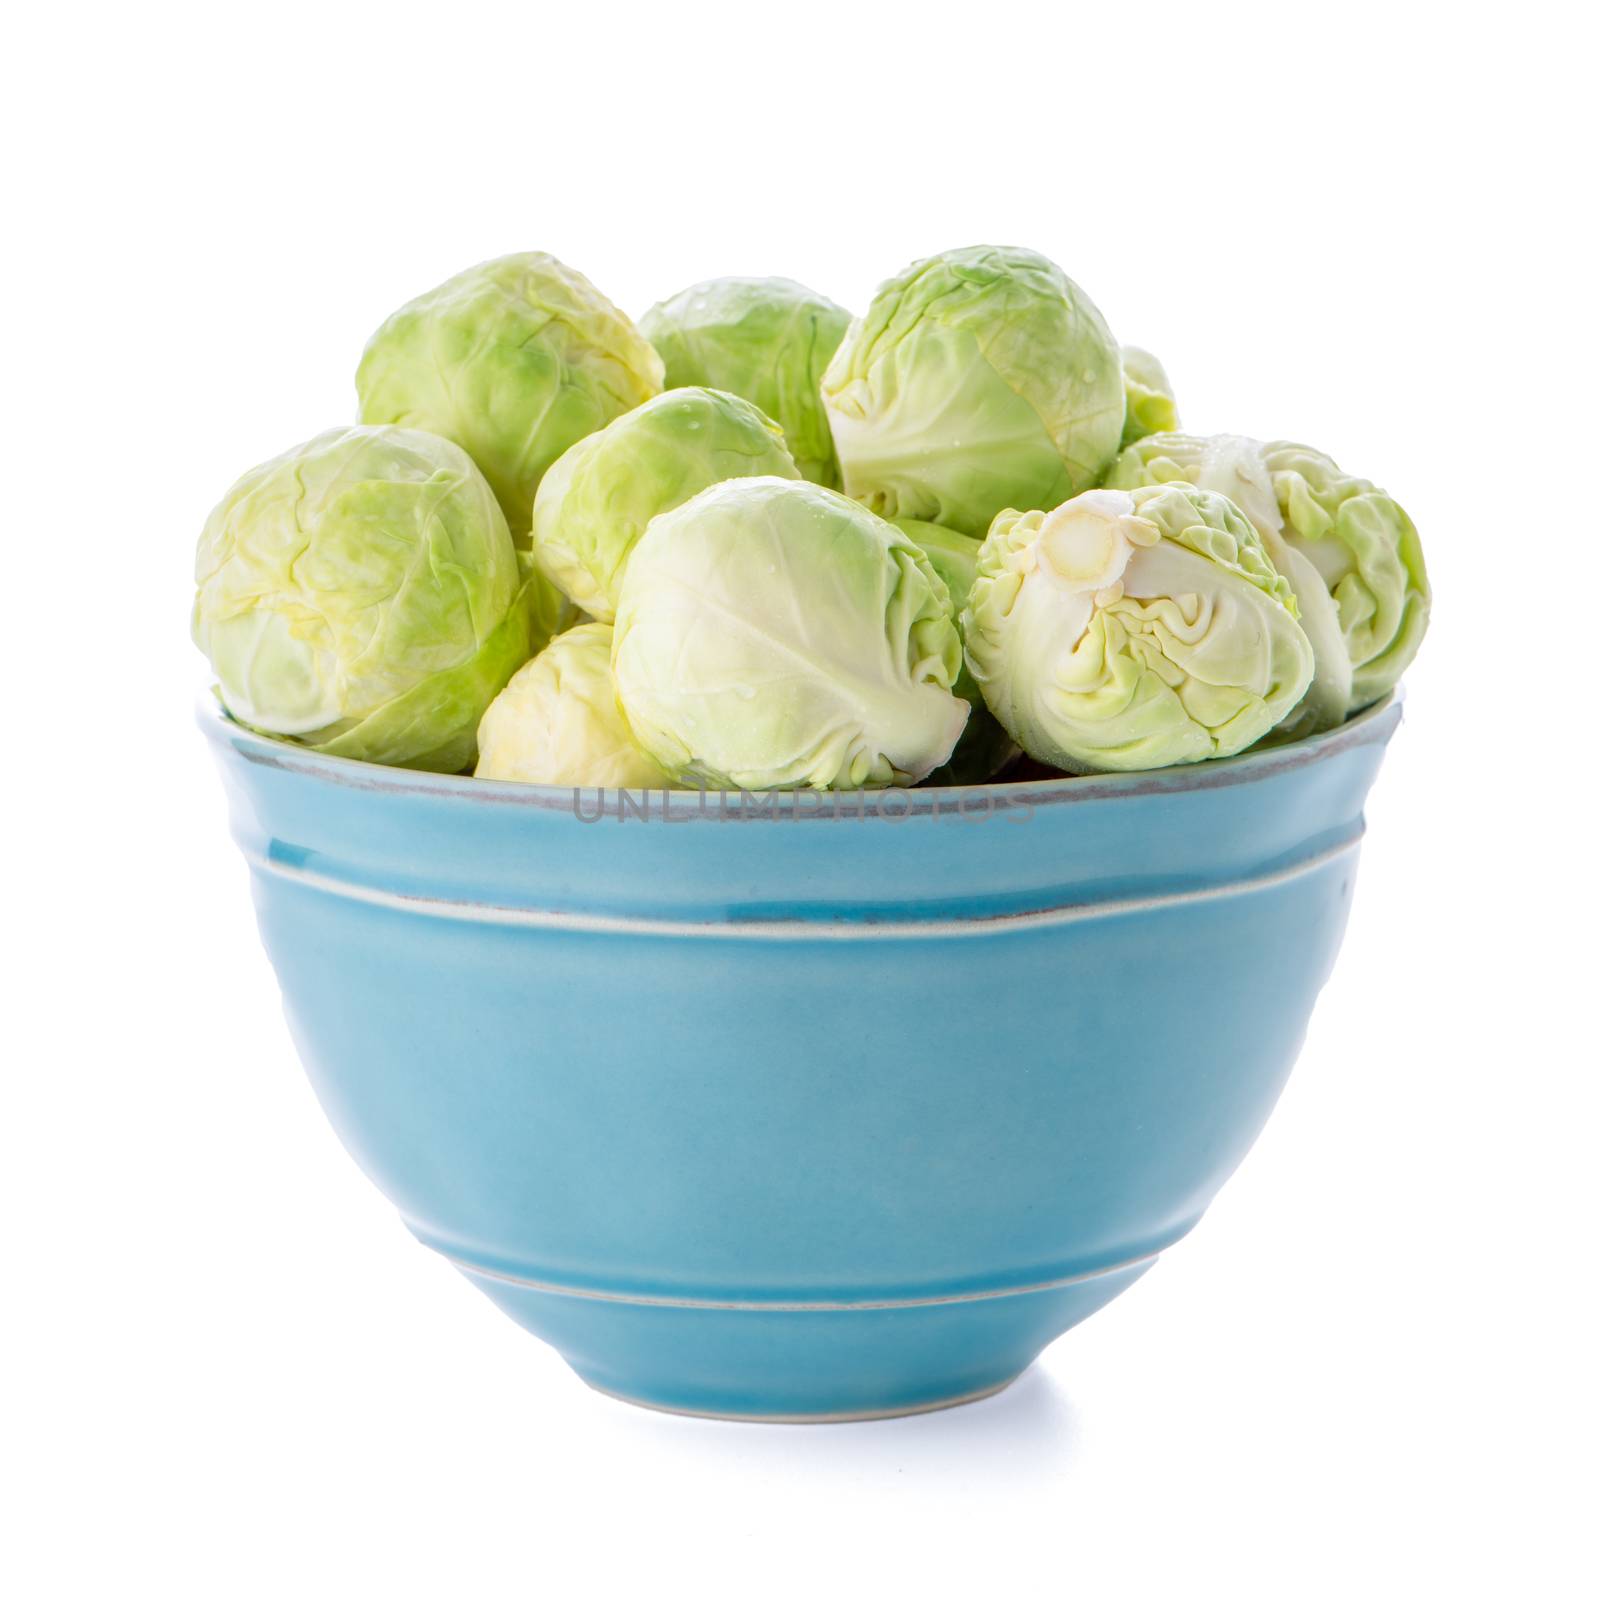 Fresh brussels sprouts on blue ceramic bowl isolated on white background.